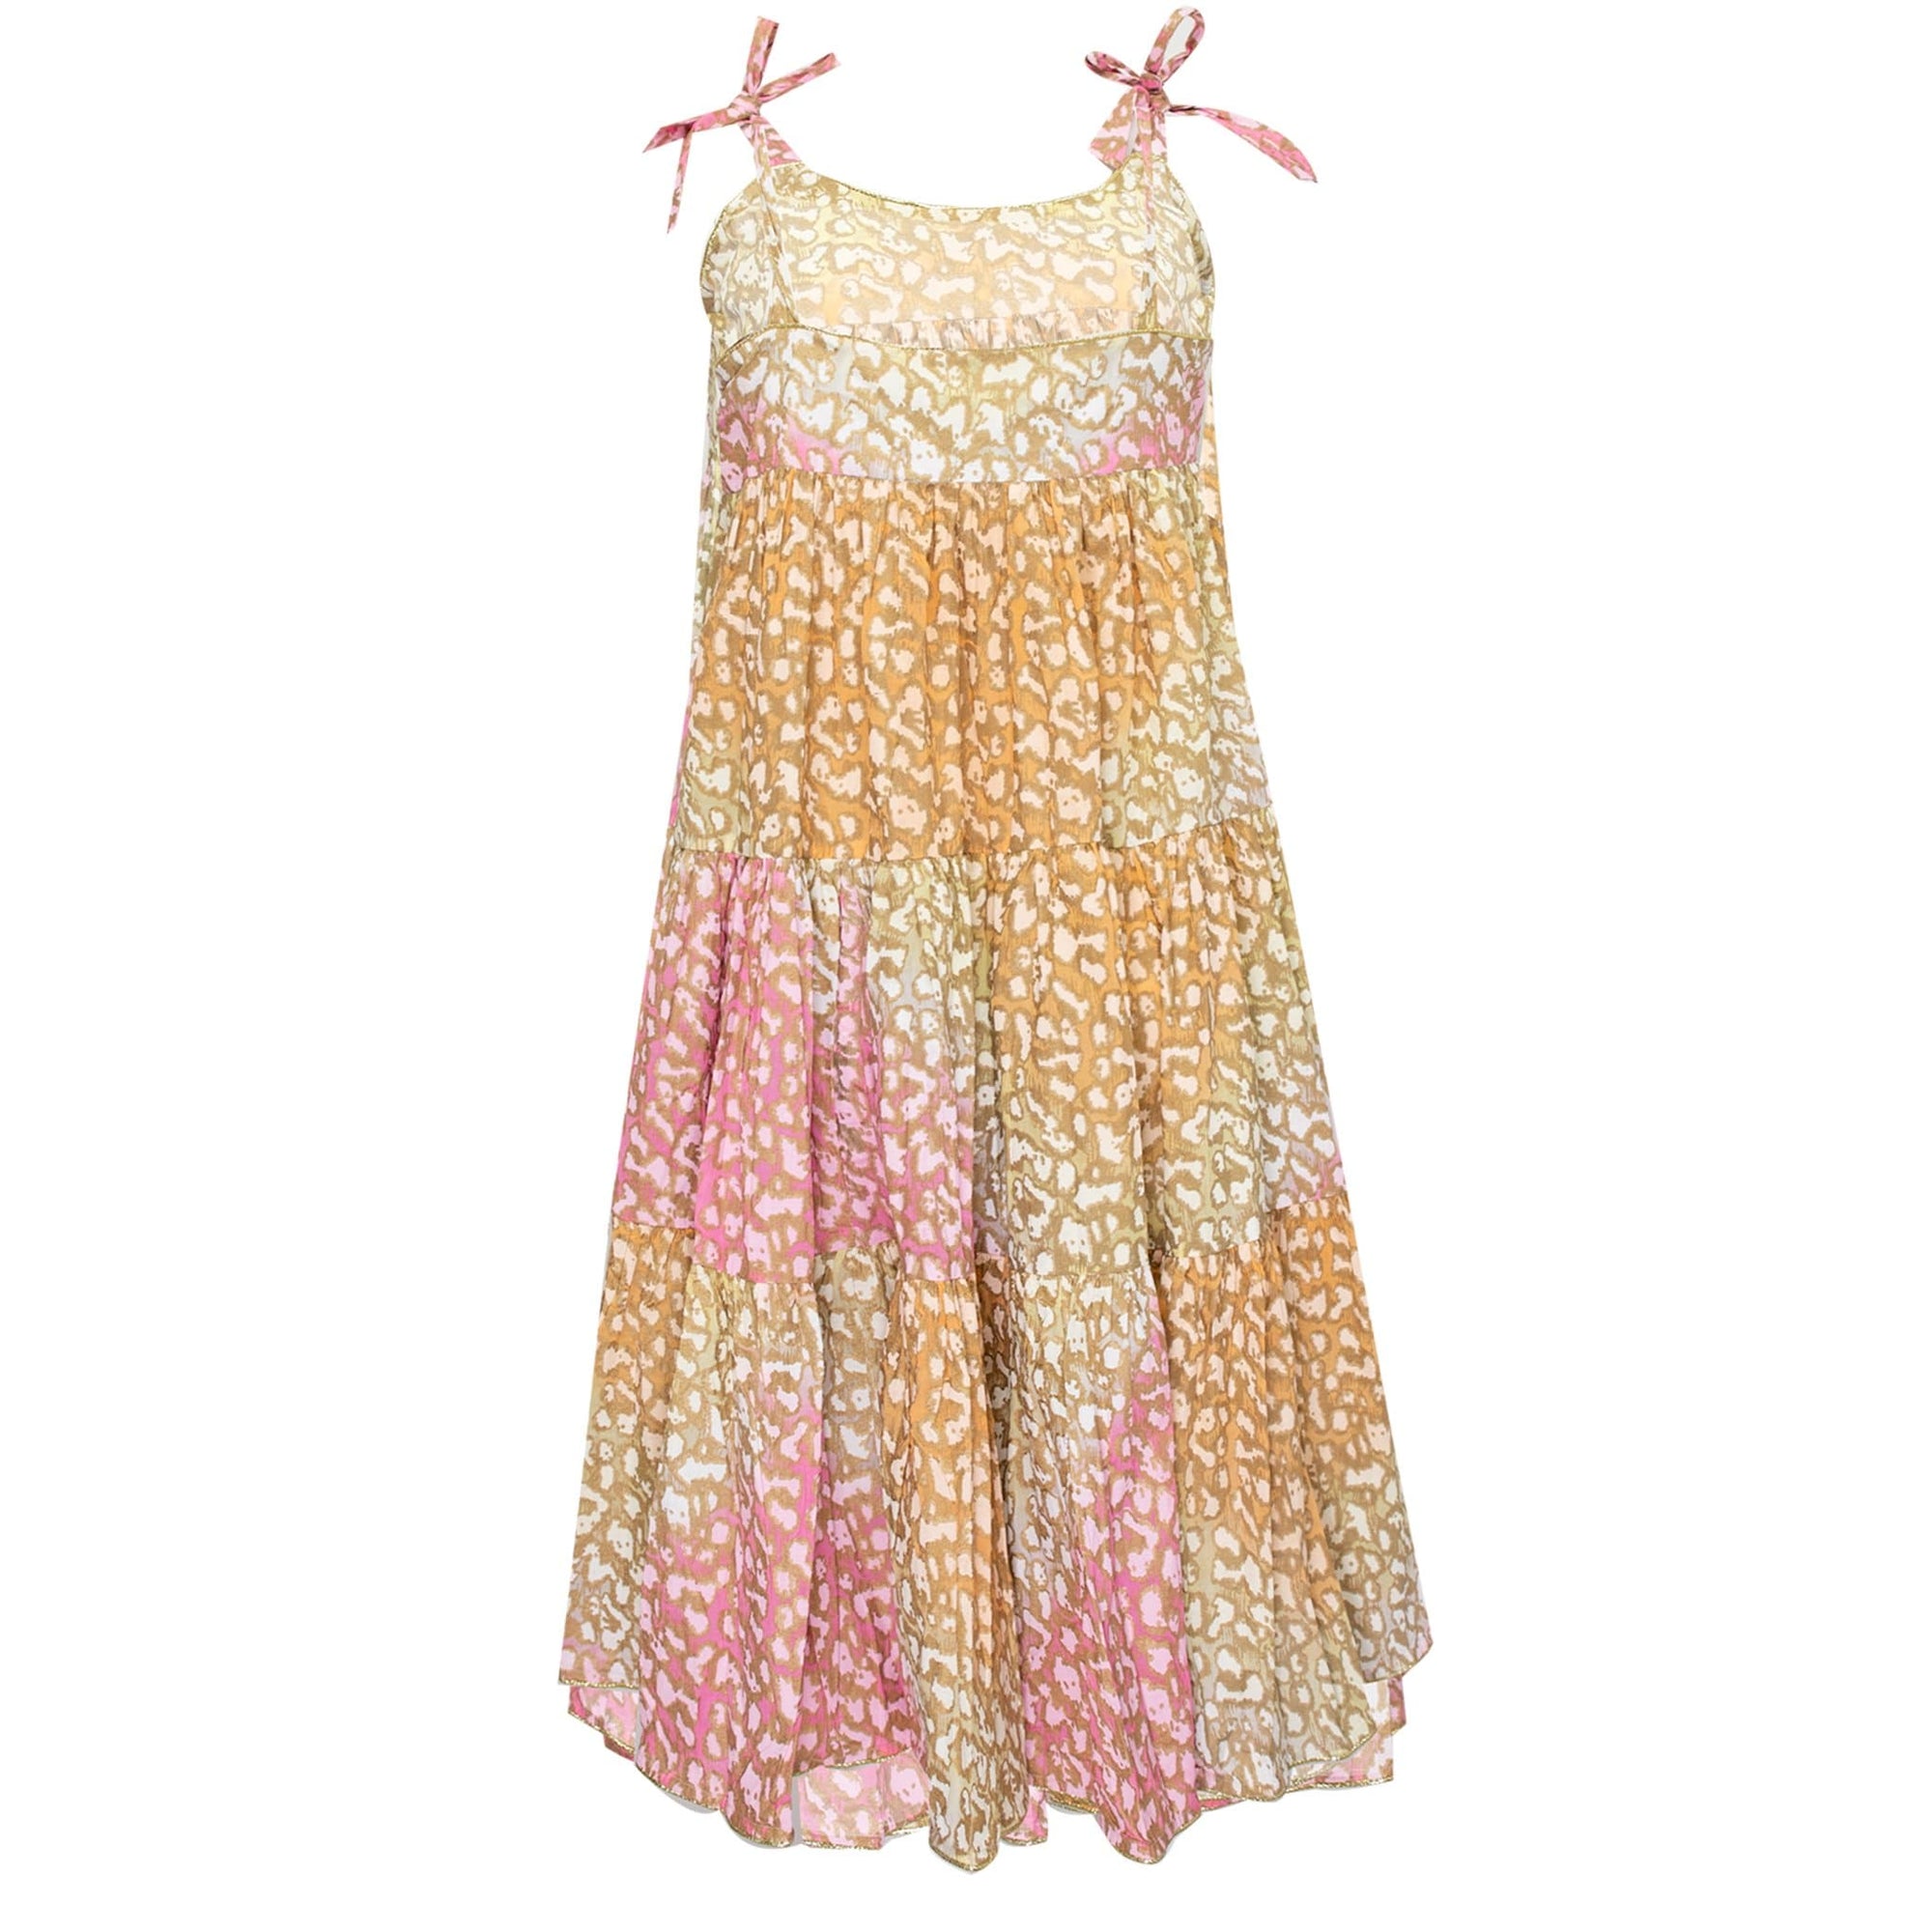 Tie Dye 70's Sundress in Orange, Pink and Yellow Snow Leopard Print